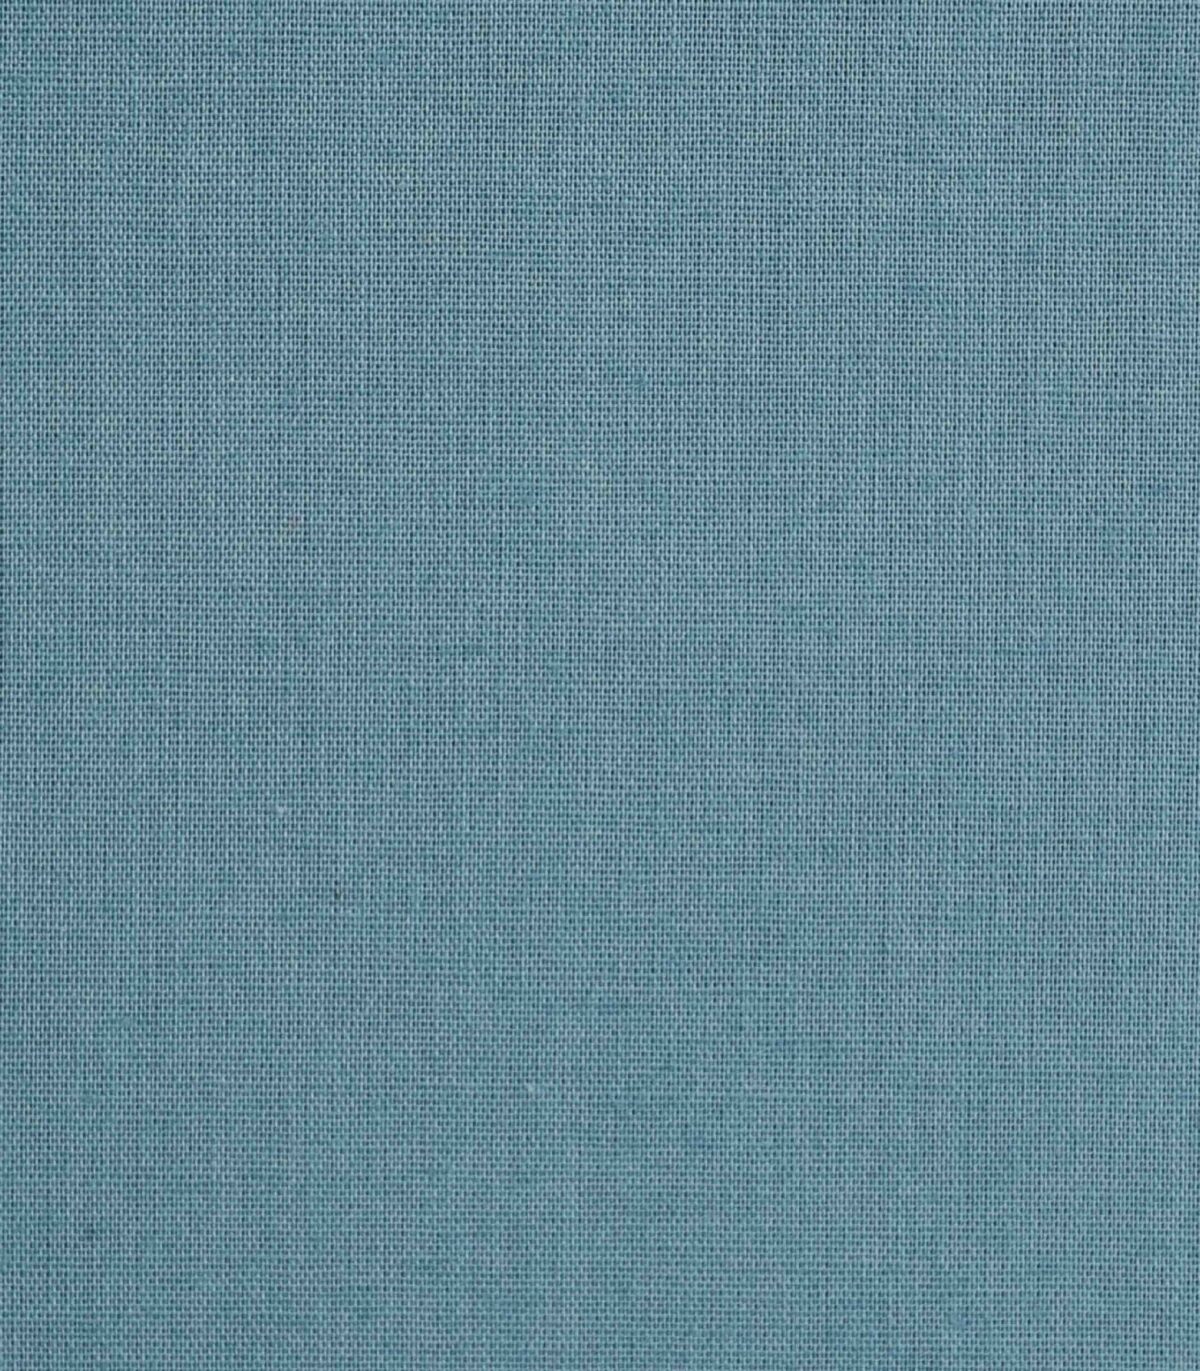 Cotton Poly Light Blue Dyed Woven Fabric